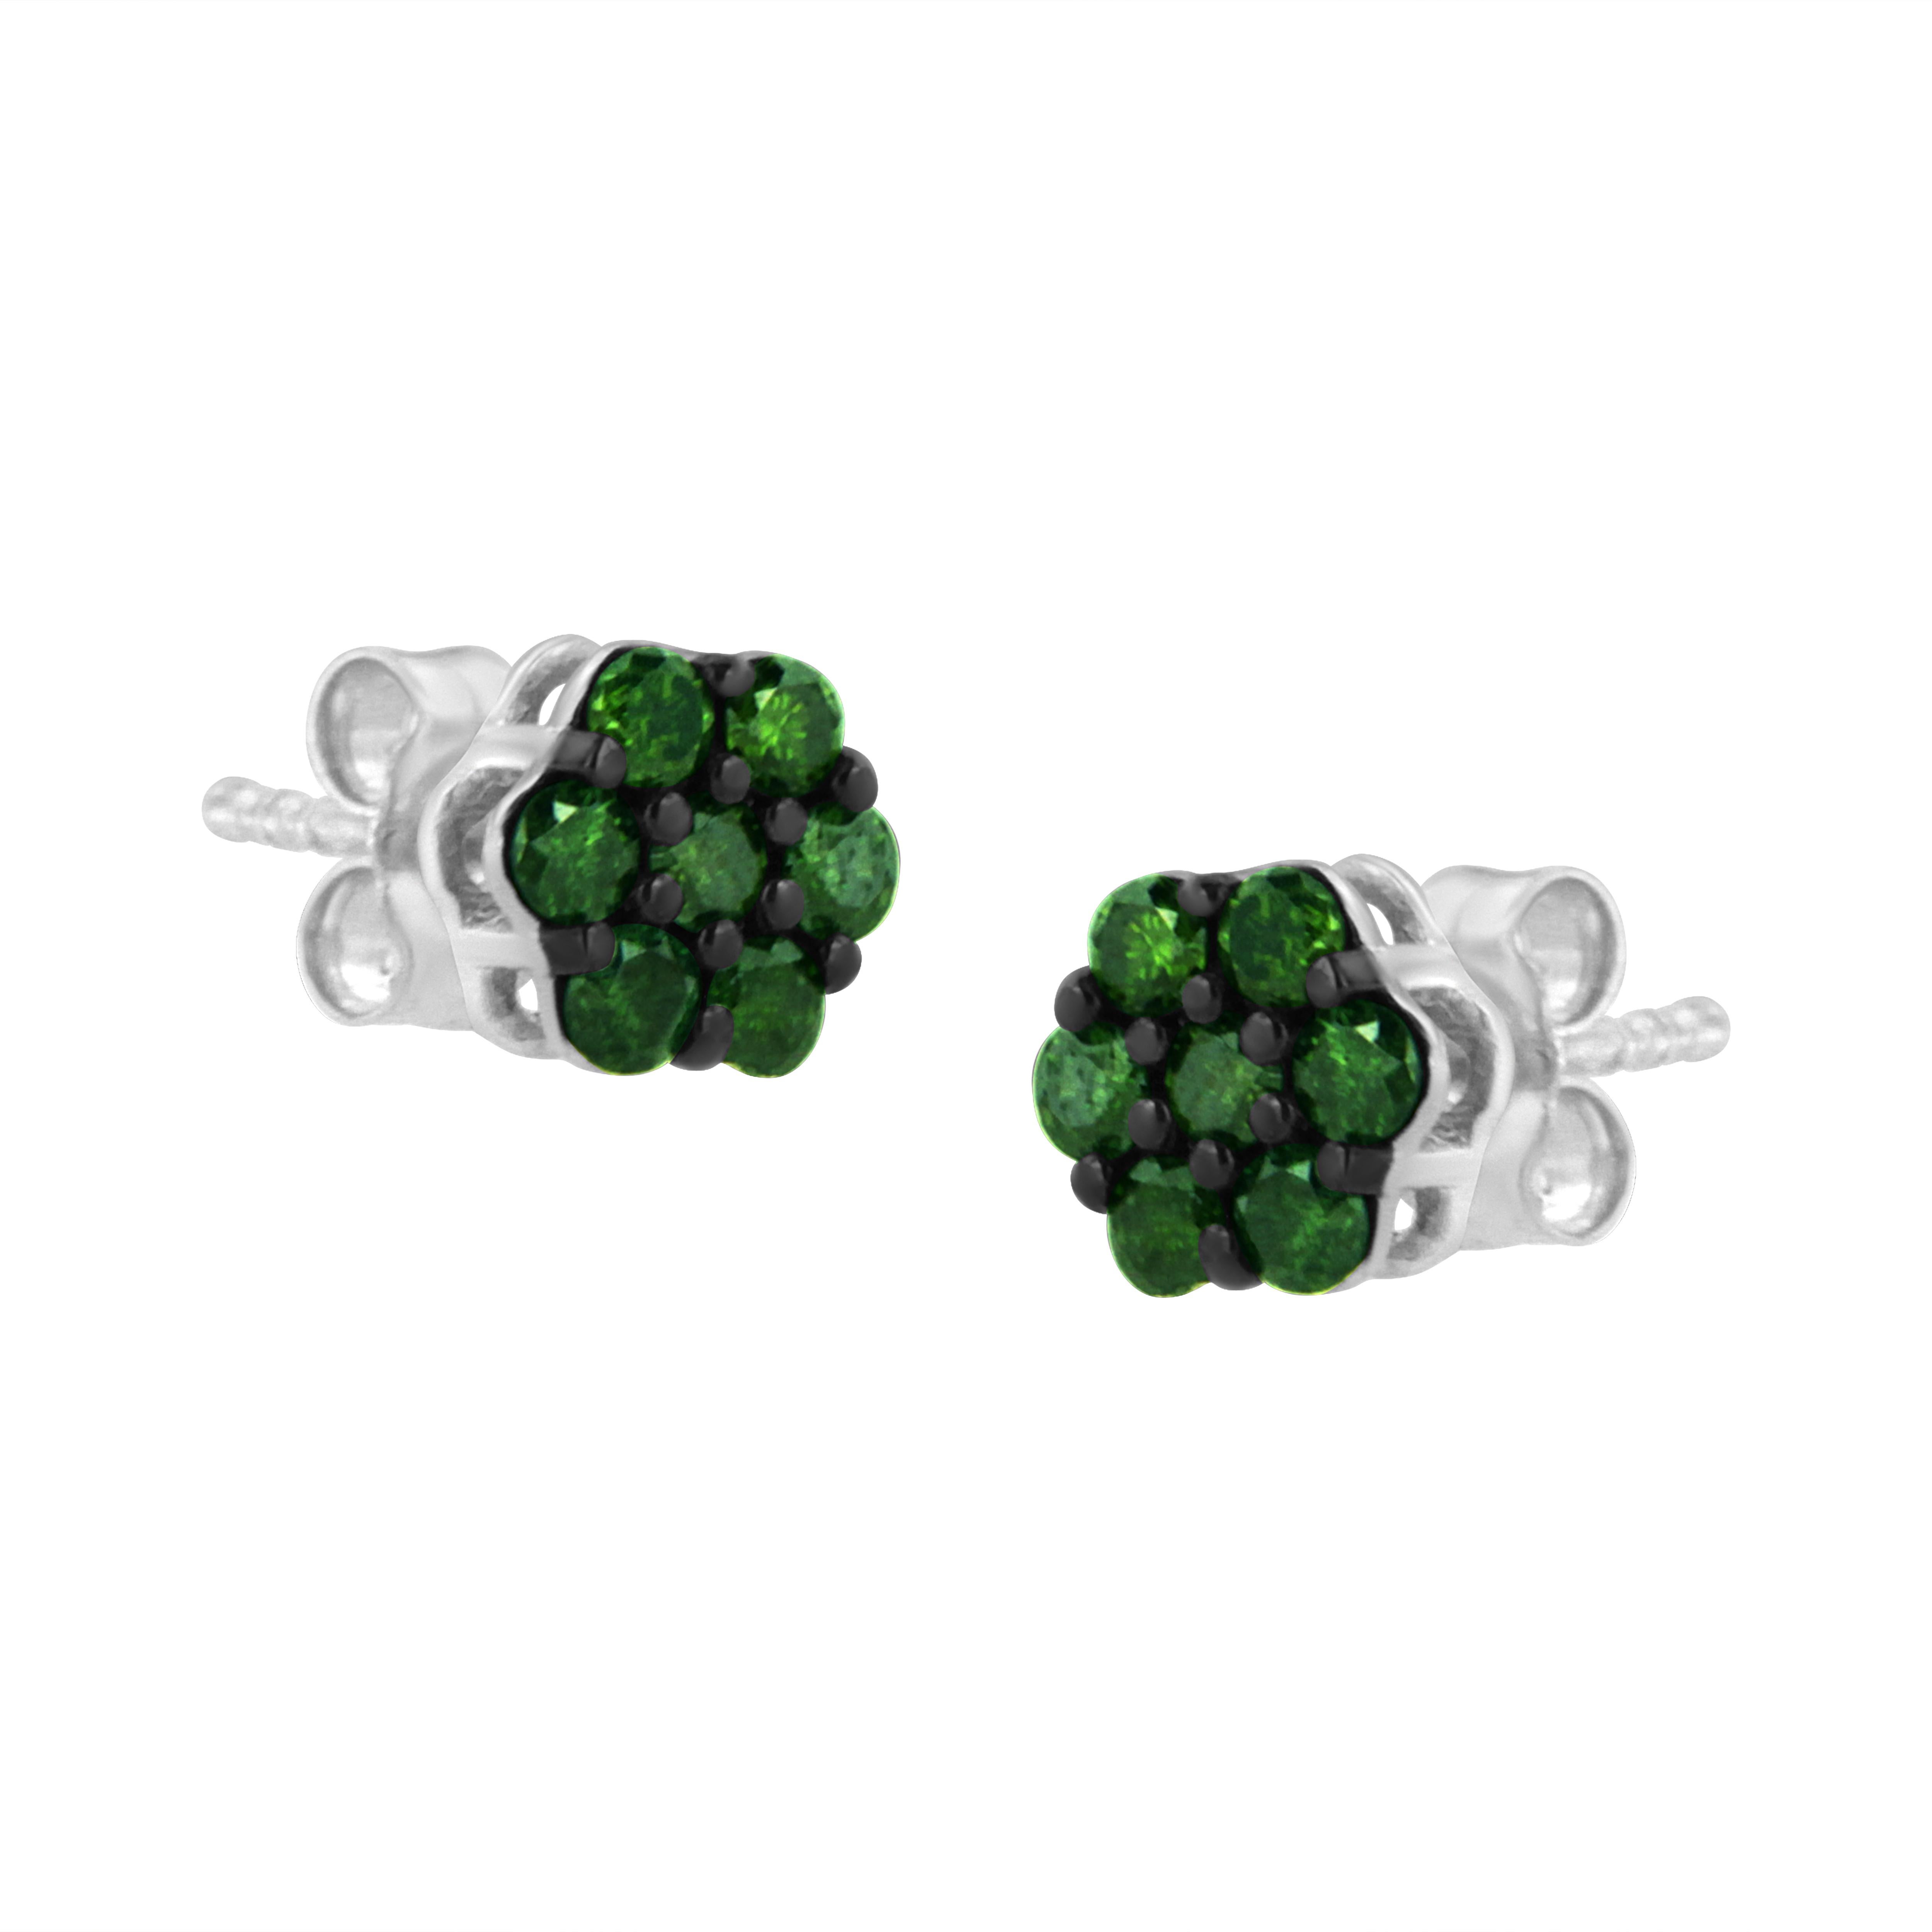 Contemporary .925 Sterling Silver 2.0 Carat Treated Green Diamond Floral Cluster Stud Earring For Sale